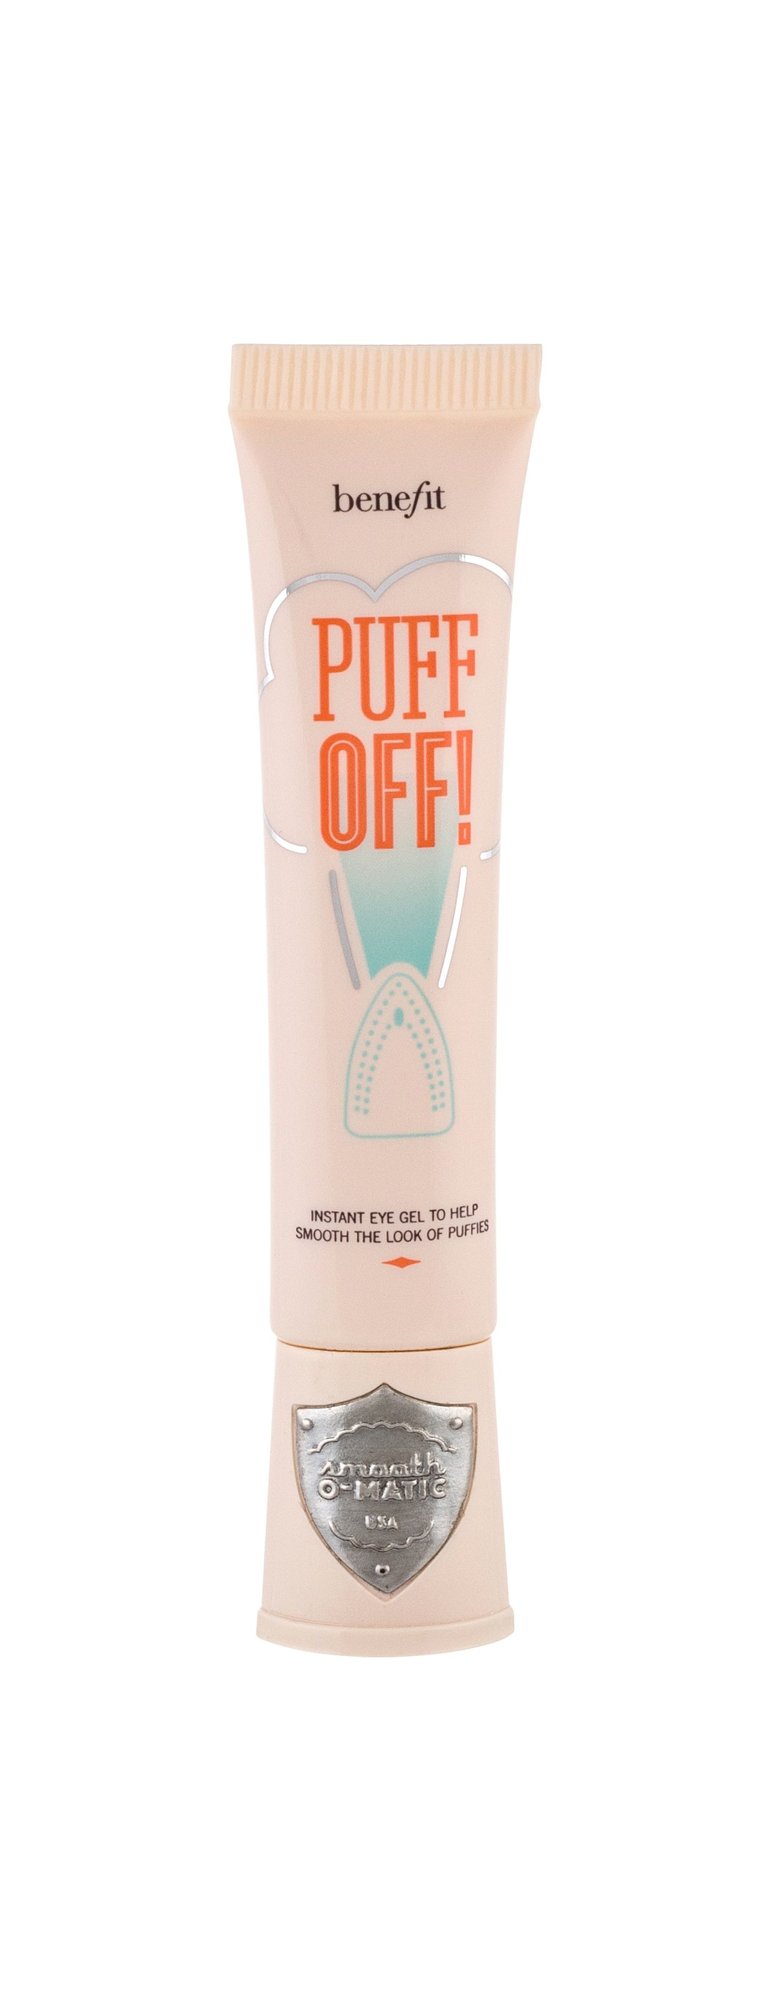 Benefit Puff Off!